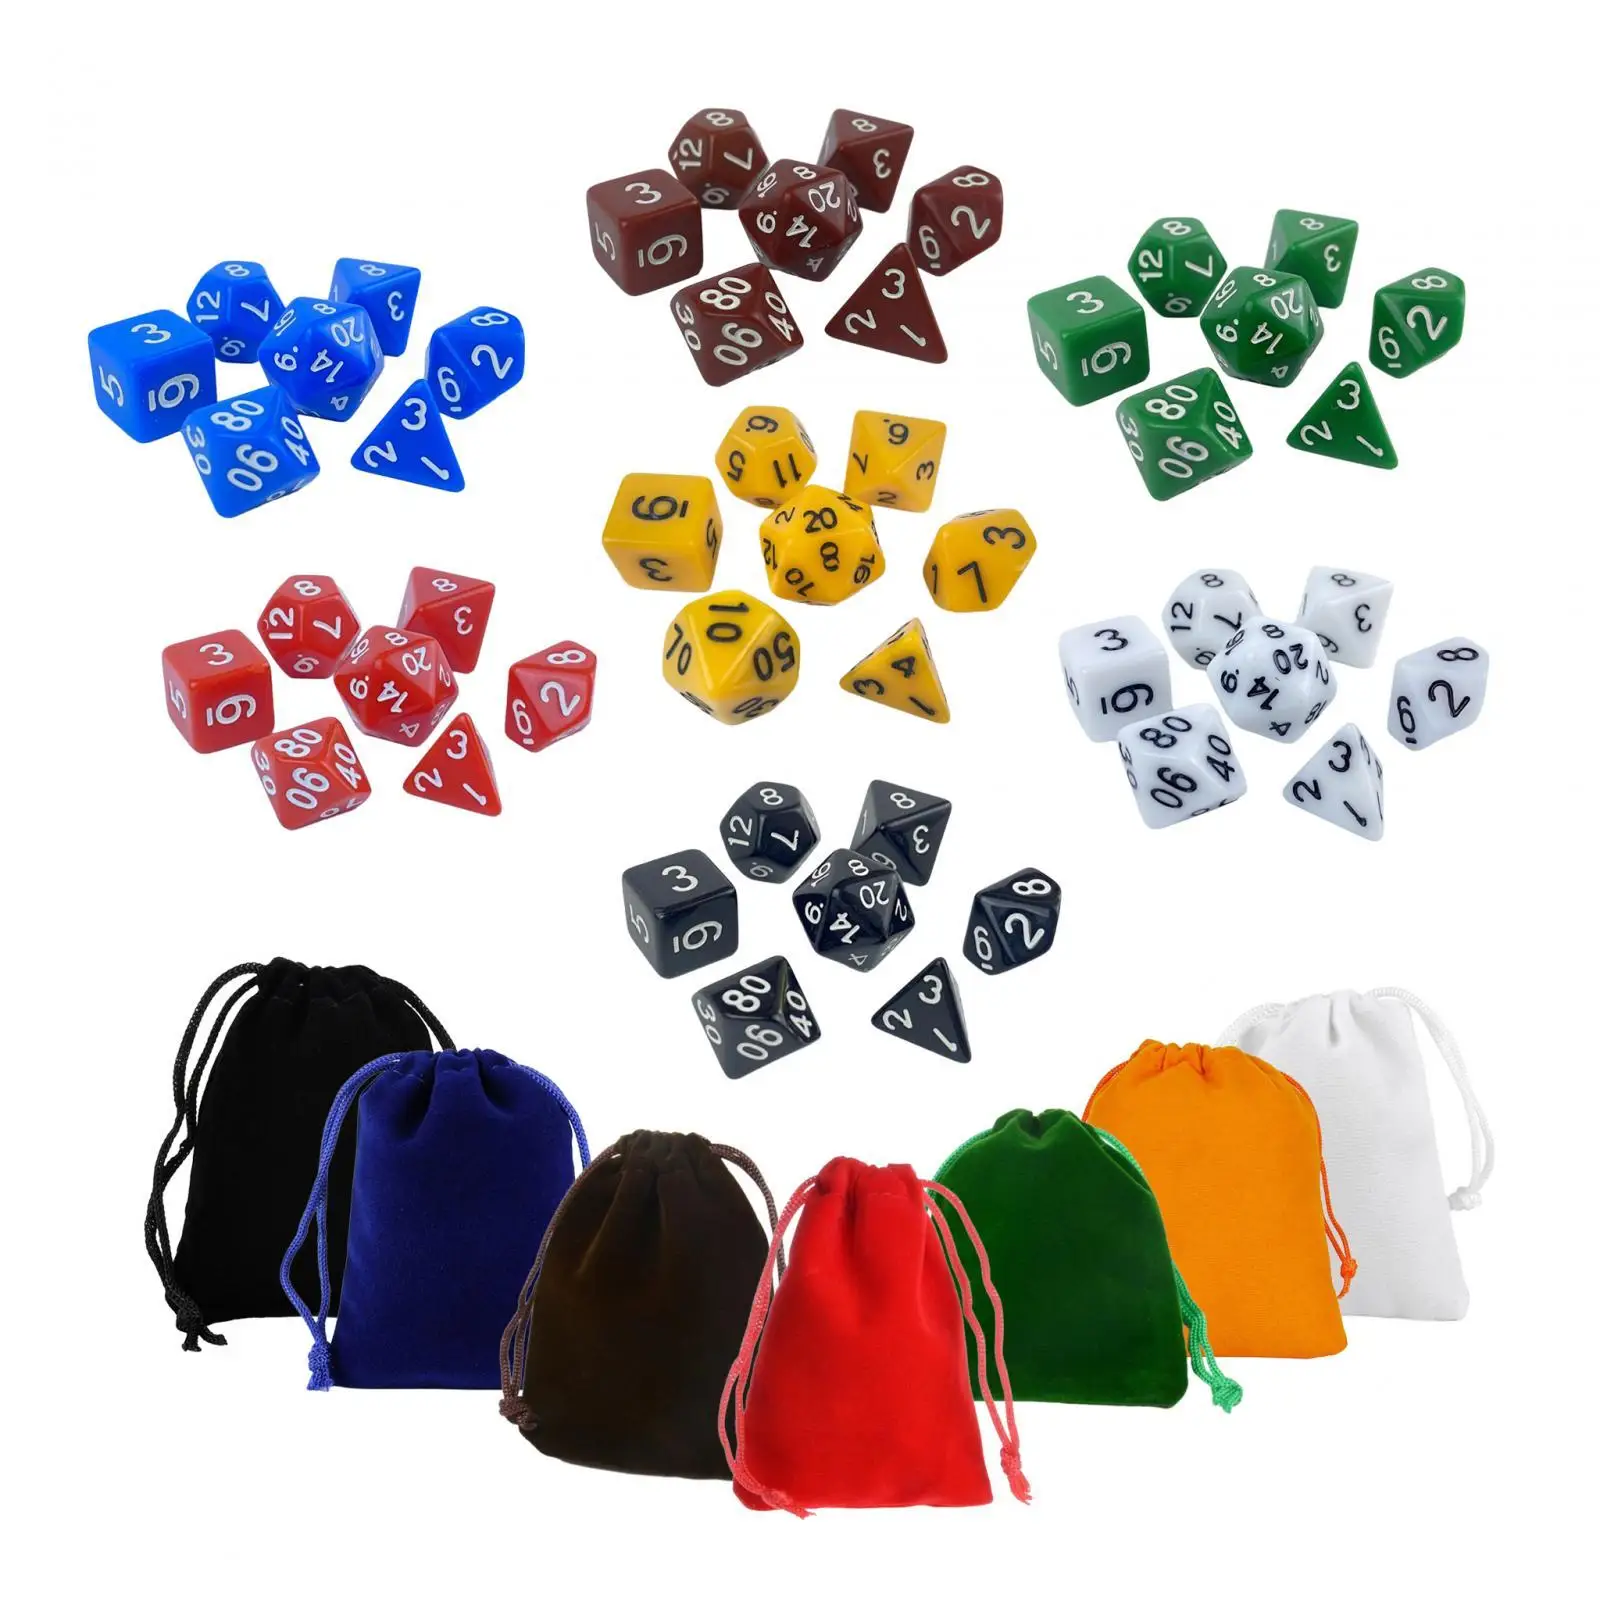 49 Pieces Dice Set Entertainment Toys Polyhedral Dices for KTV Table Game